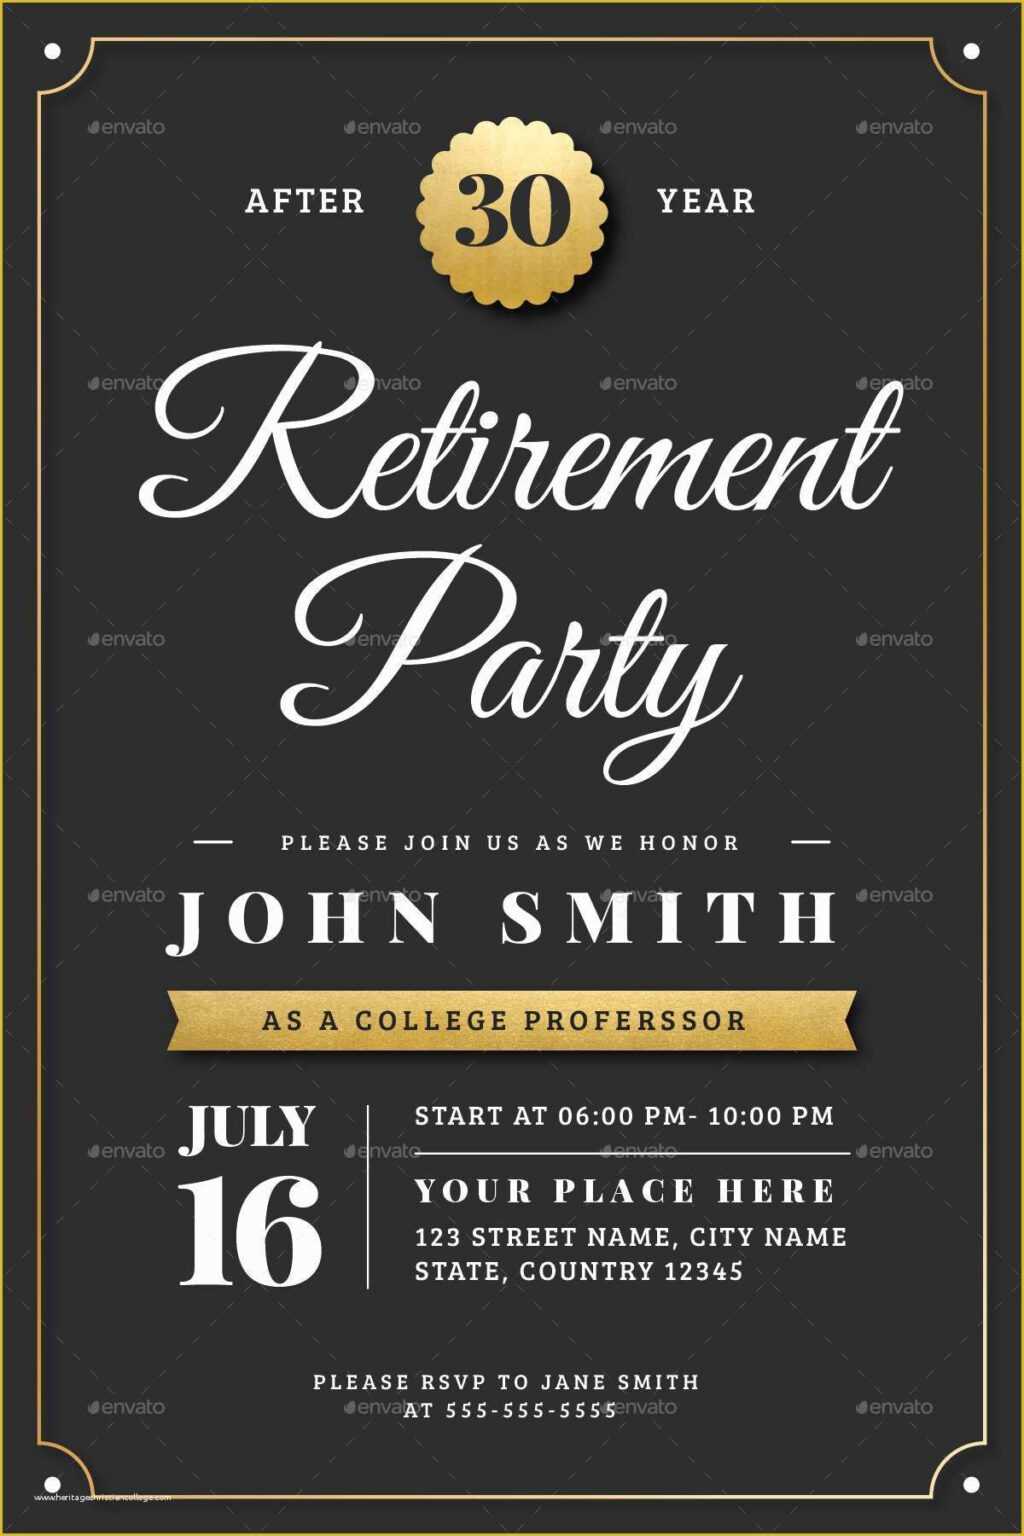 Free Retirement Templates For Flyers Best Professional Templates